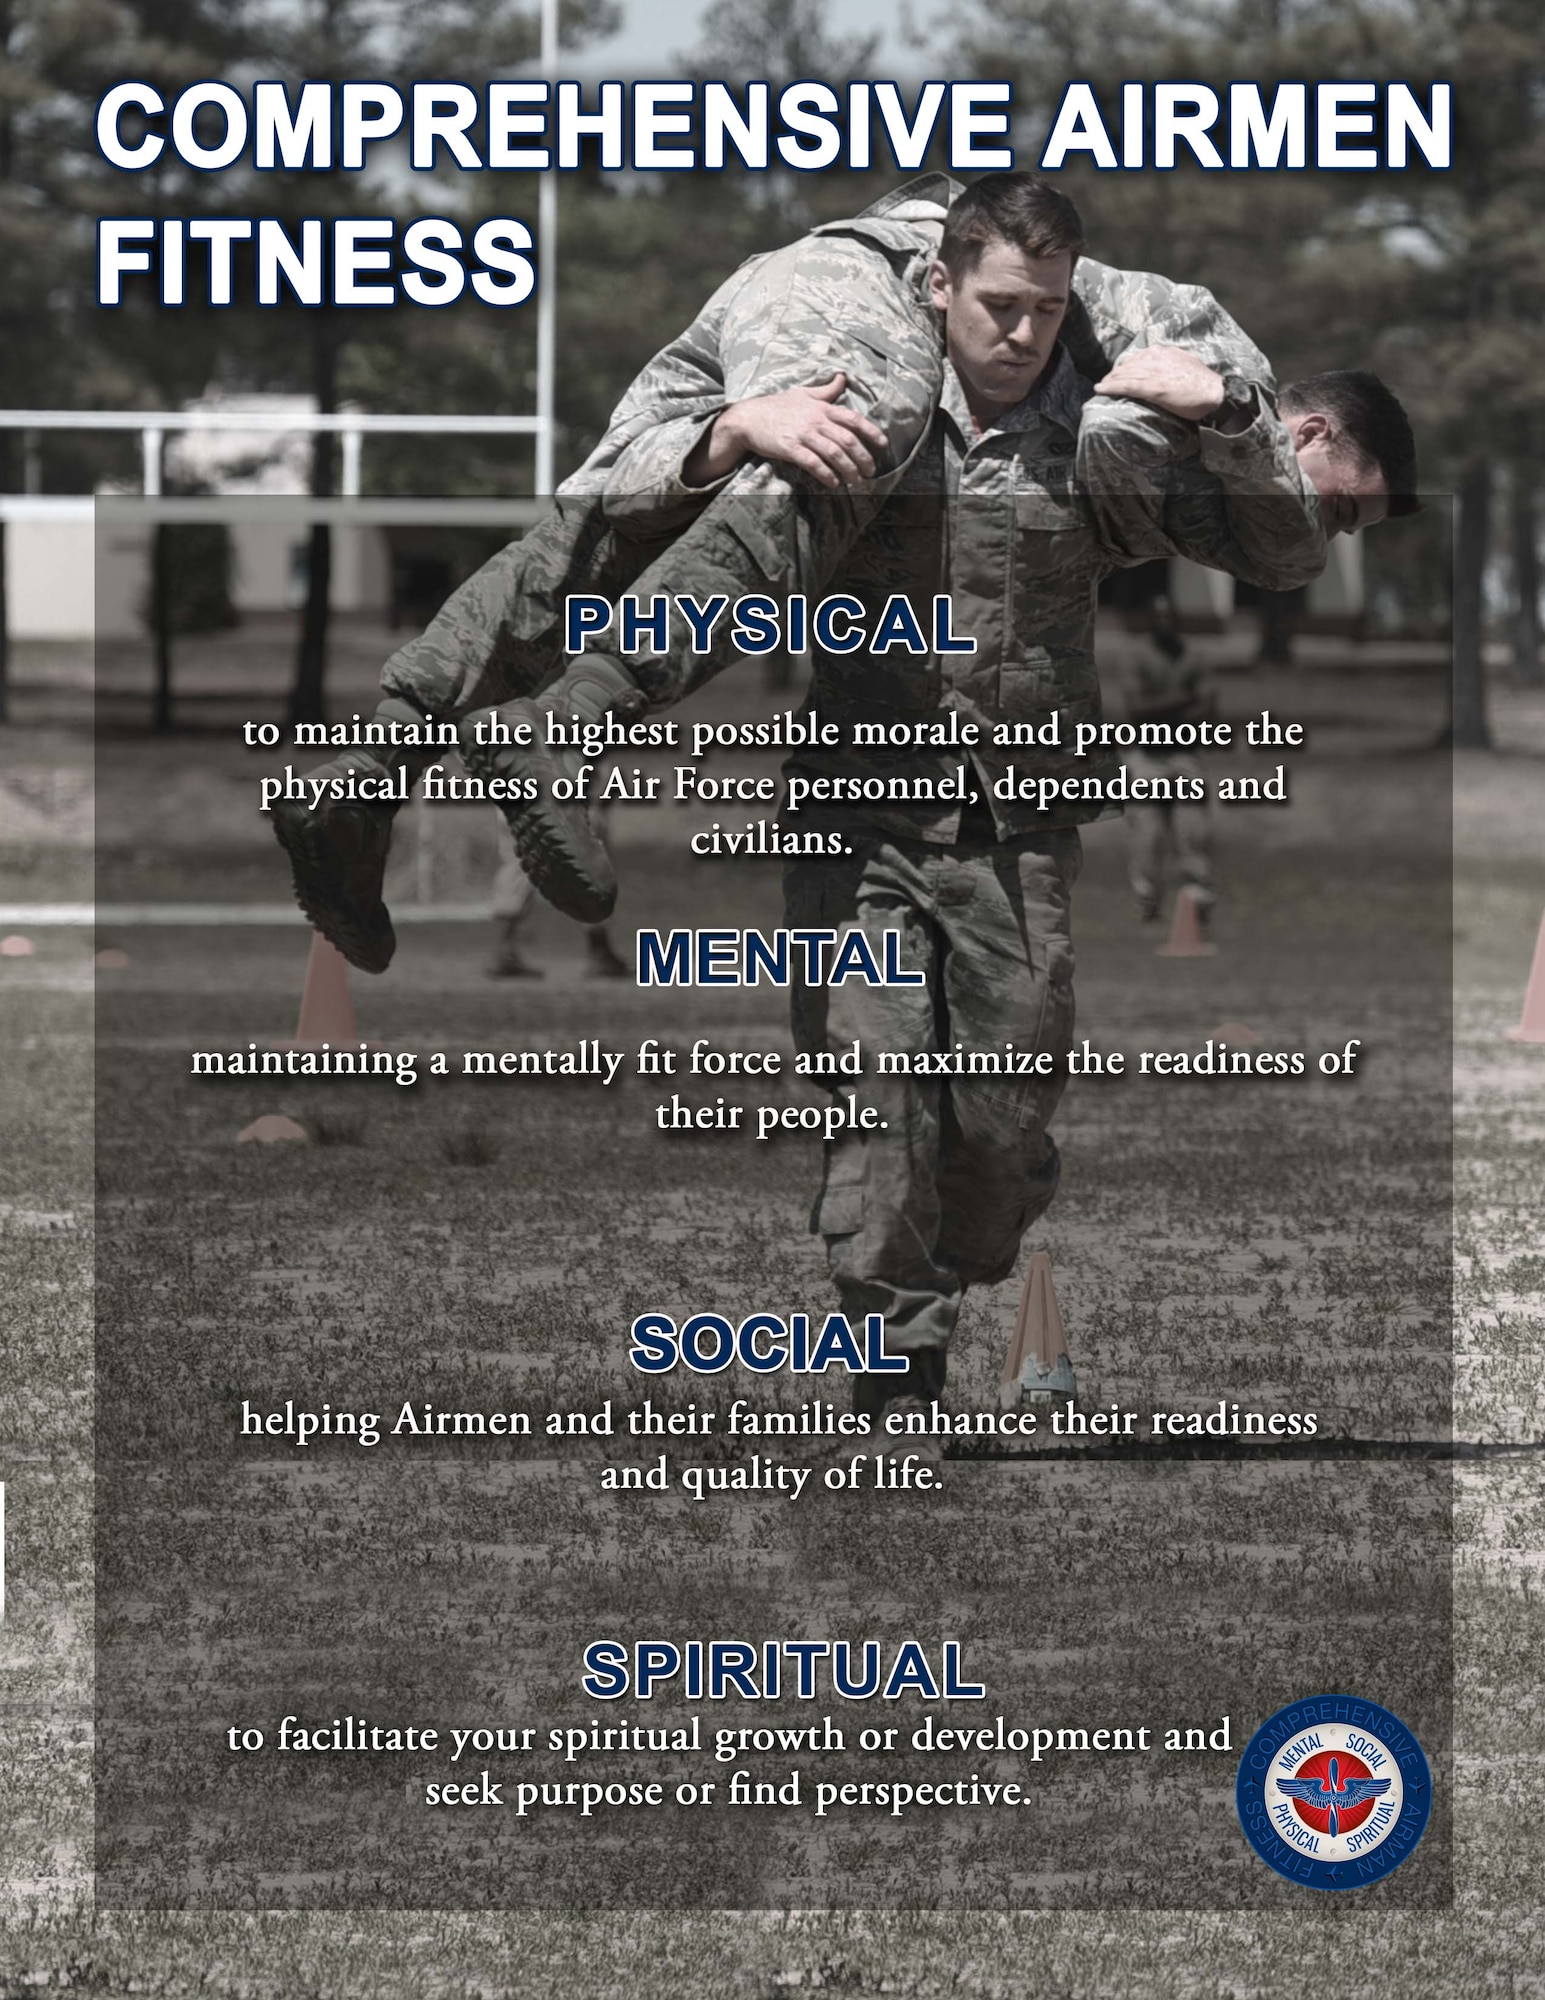 Comprehensive Airman Fitness (CAF) is a philosophy and methodology of taking care of people July 24, 2017, at Little Rock Air Force Base, Ark. CAF allows members on base to look after their fellow Airmen and their families, providing for their physical, social, mental and social fitness.